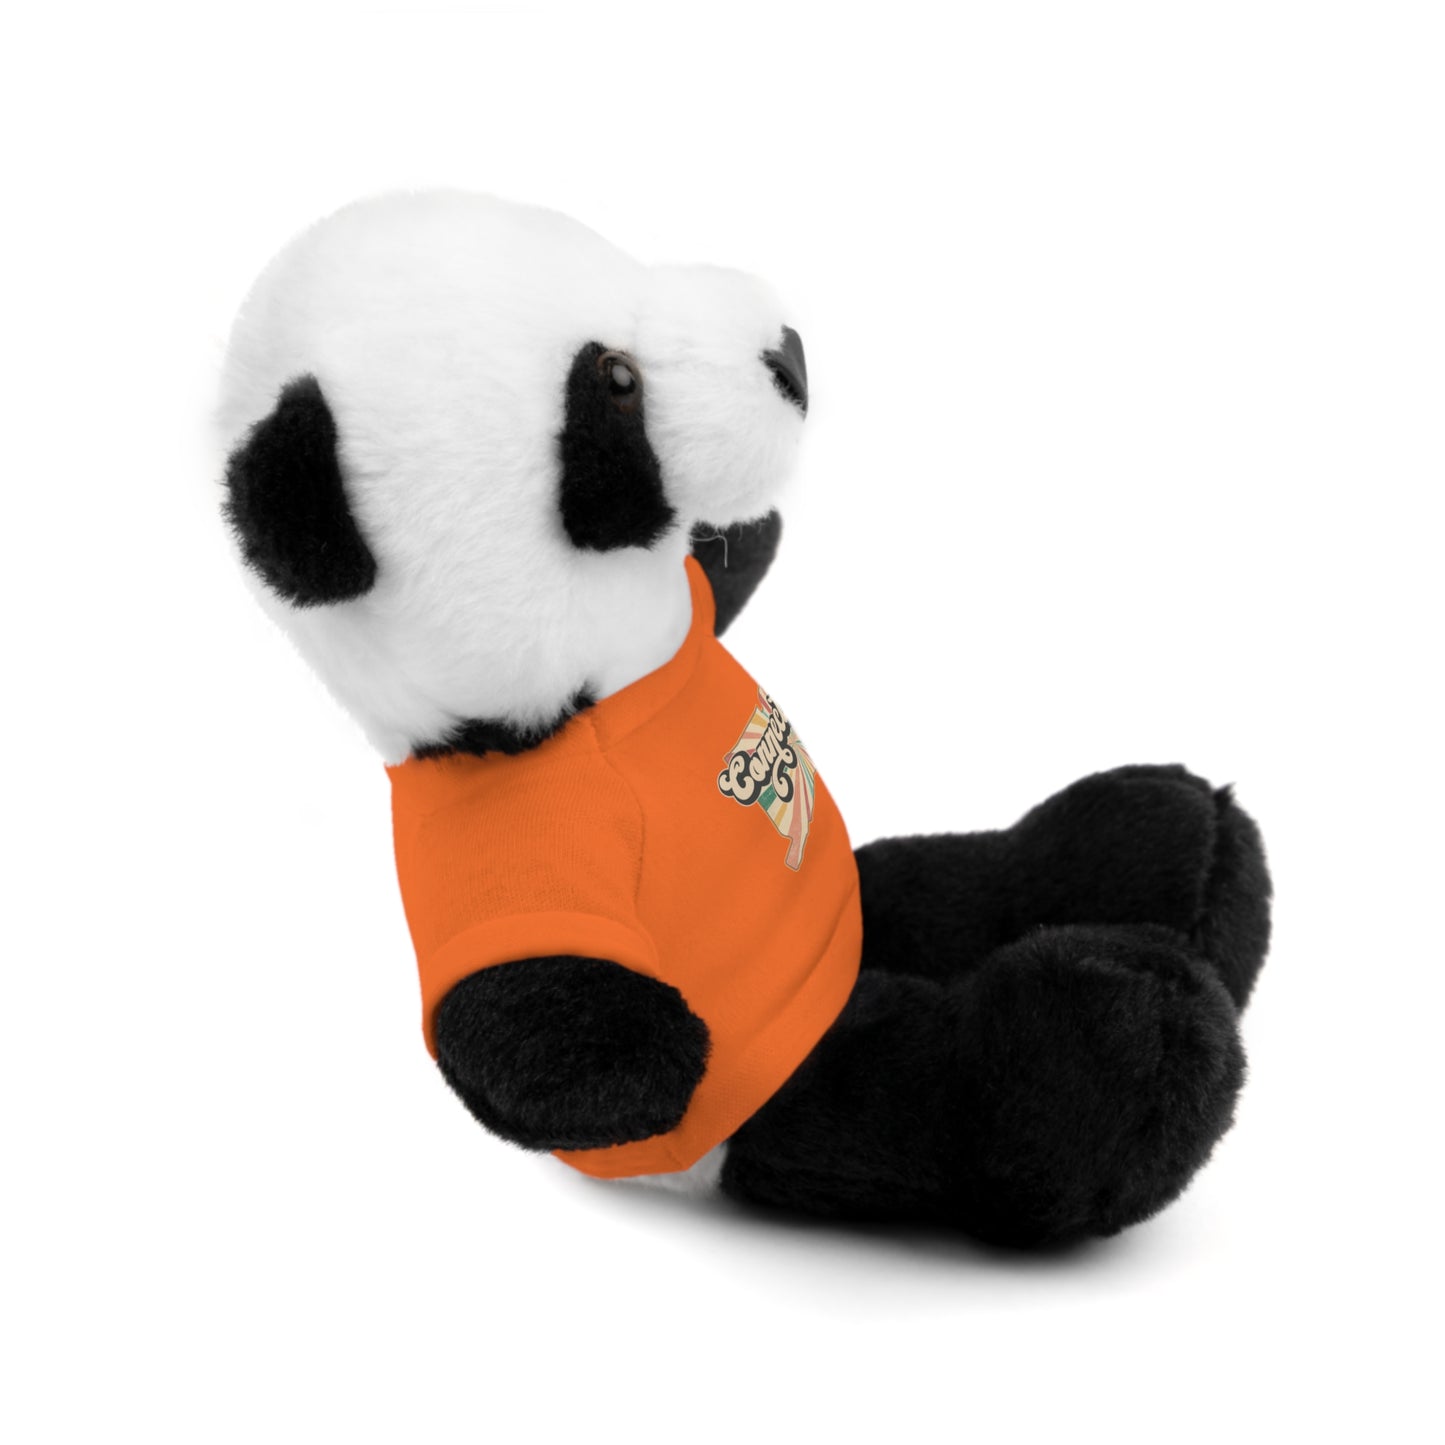 Connecticut Groovy Stuffed Animals with Tee (multiple animals and colors)